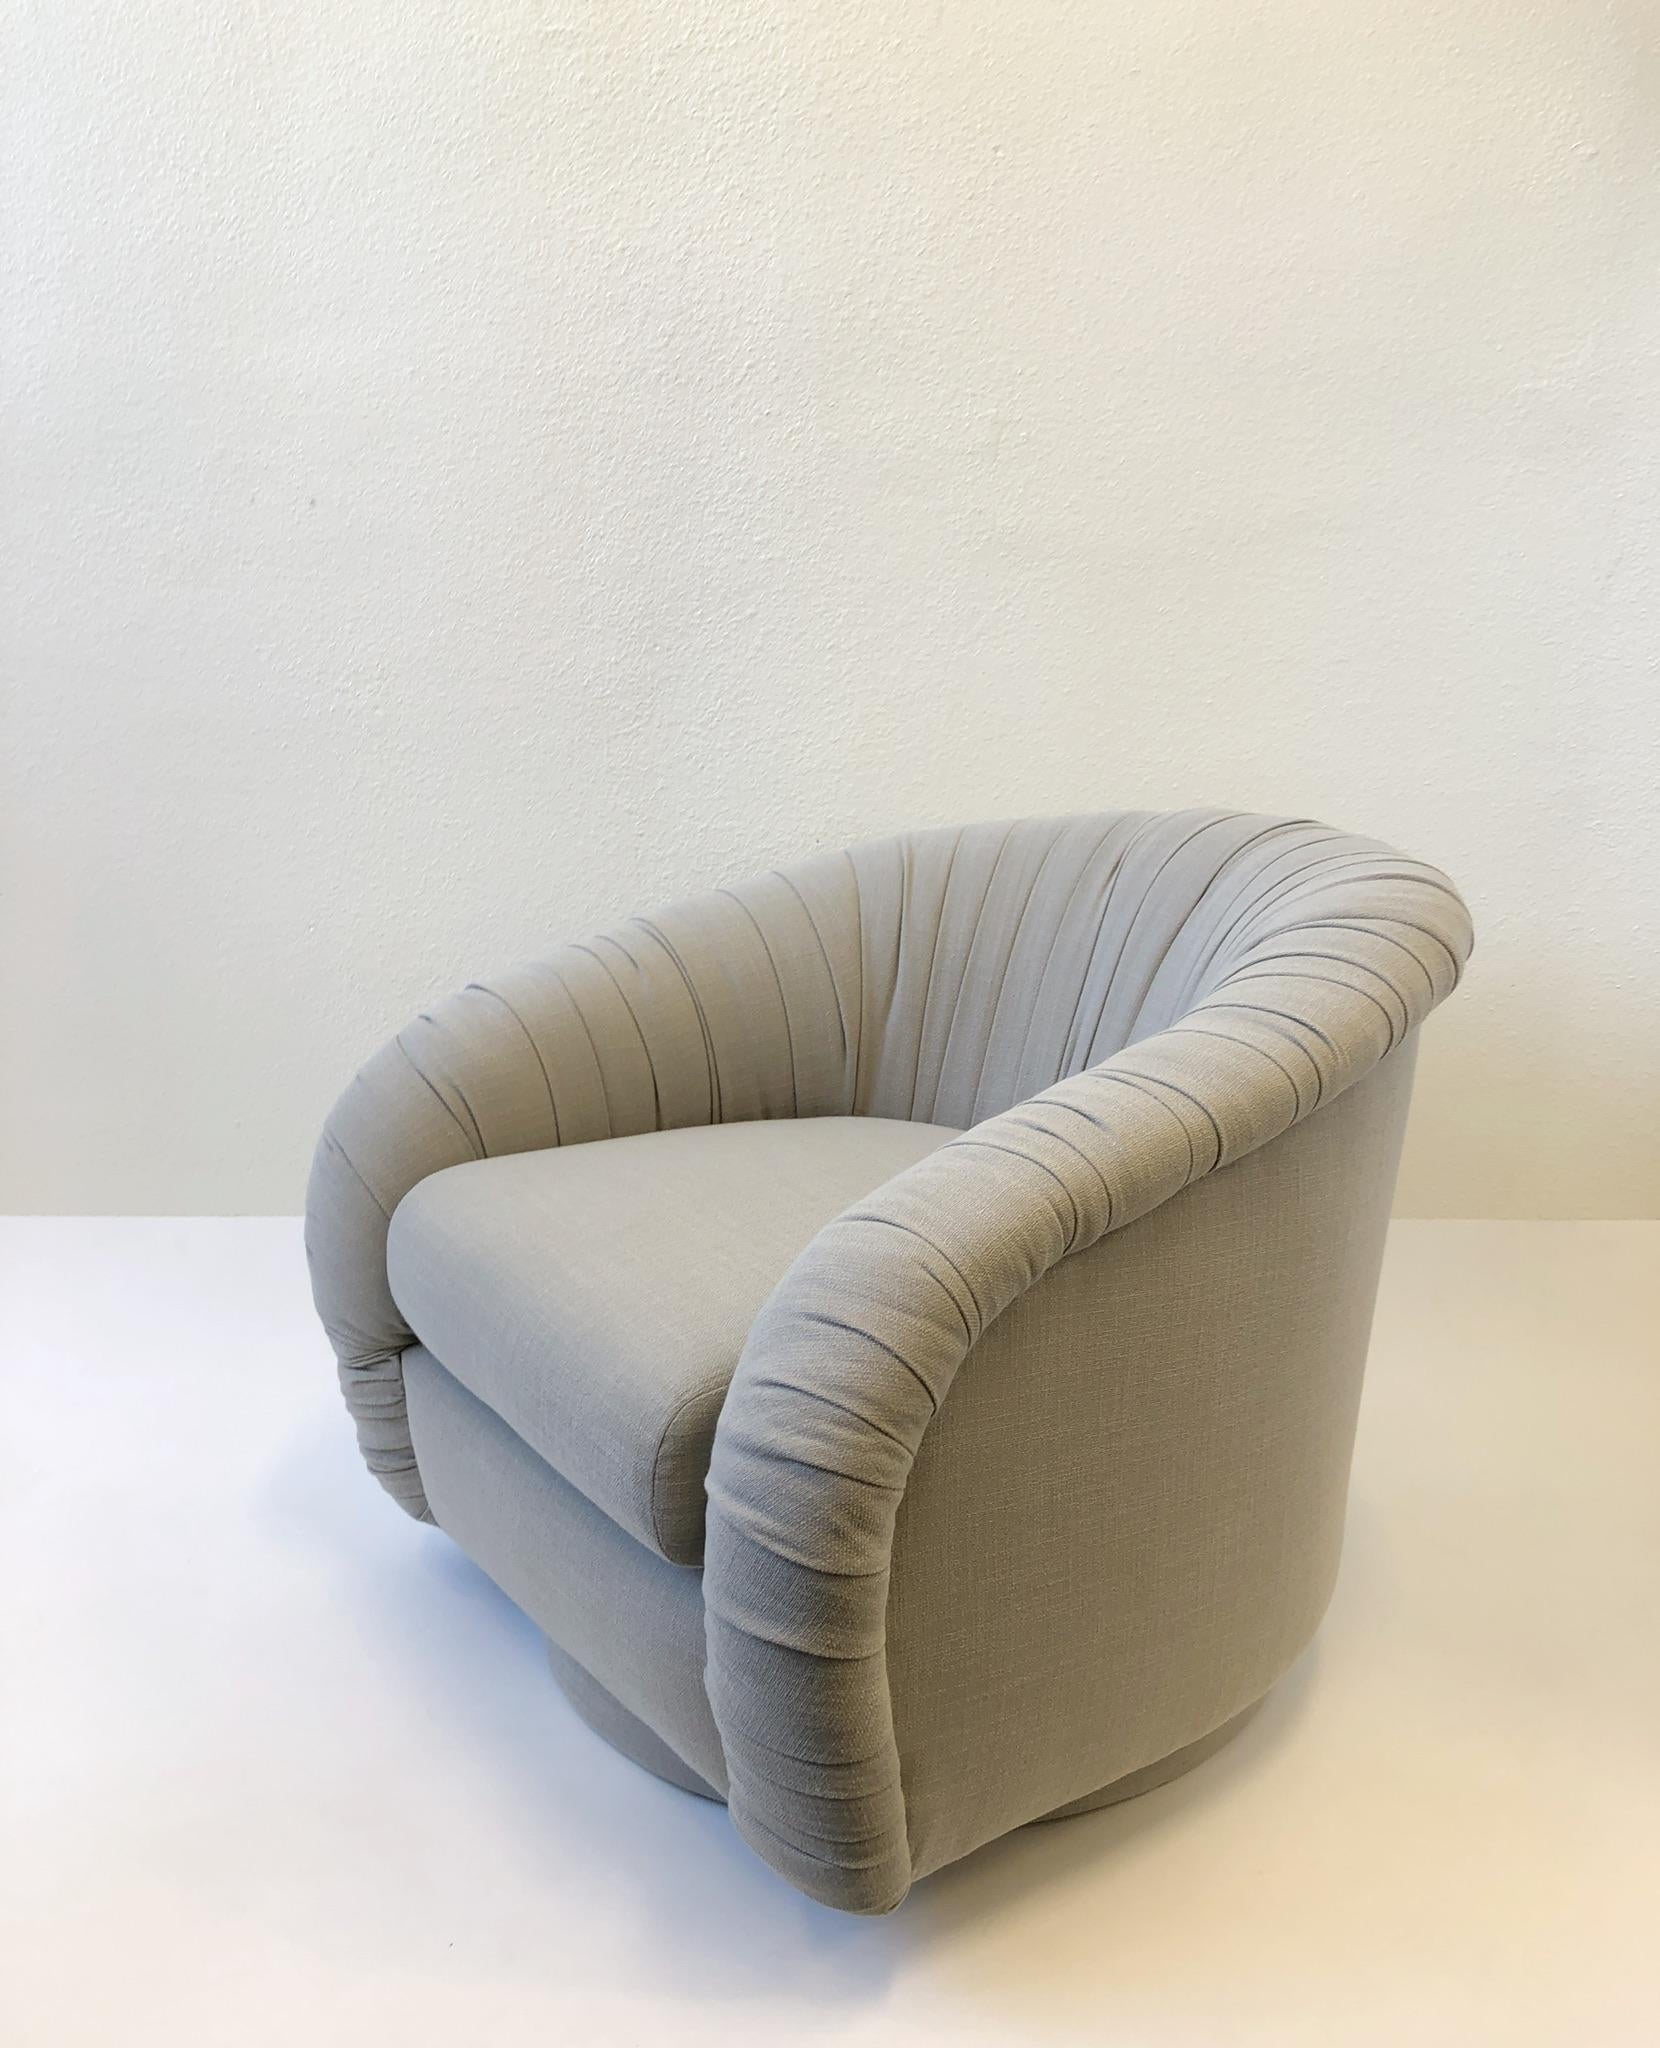 A pair of glamorous 1980s swivel lounge chairs in the manner of Milo Baughman. Newly recovered in light grey cotton fabric. The chairs rotate 360.
Dimensions: 34” wide, 34” deep, 17” seat, 28” high.